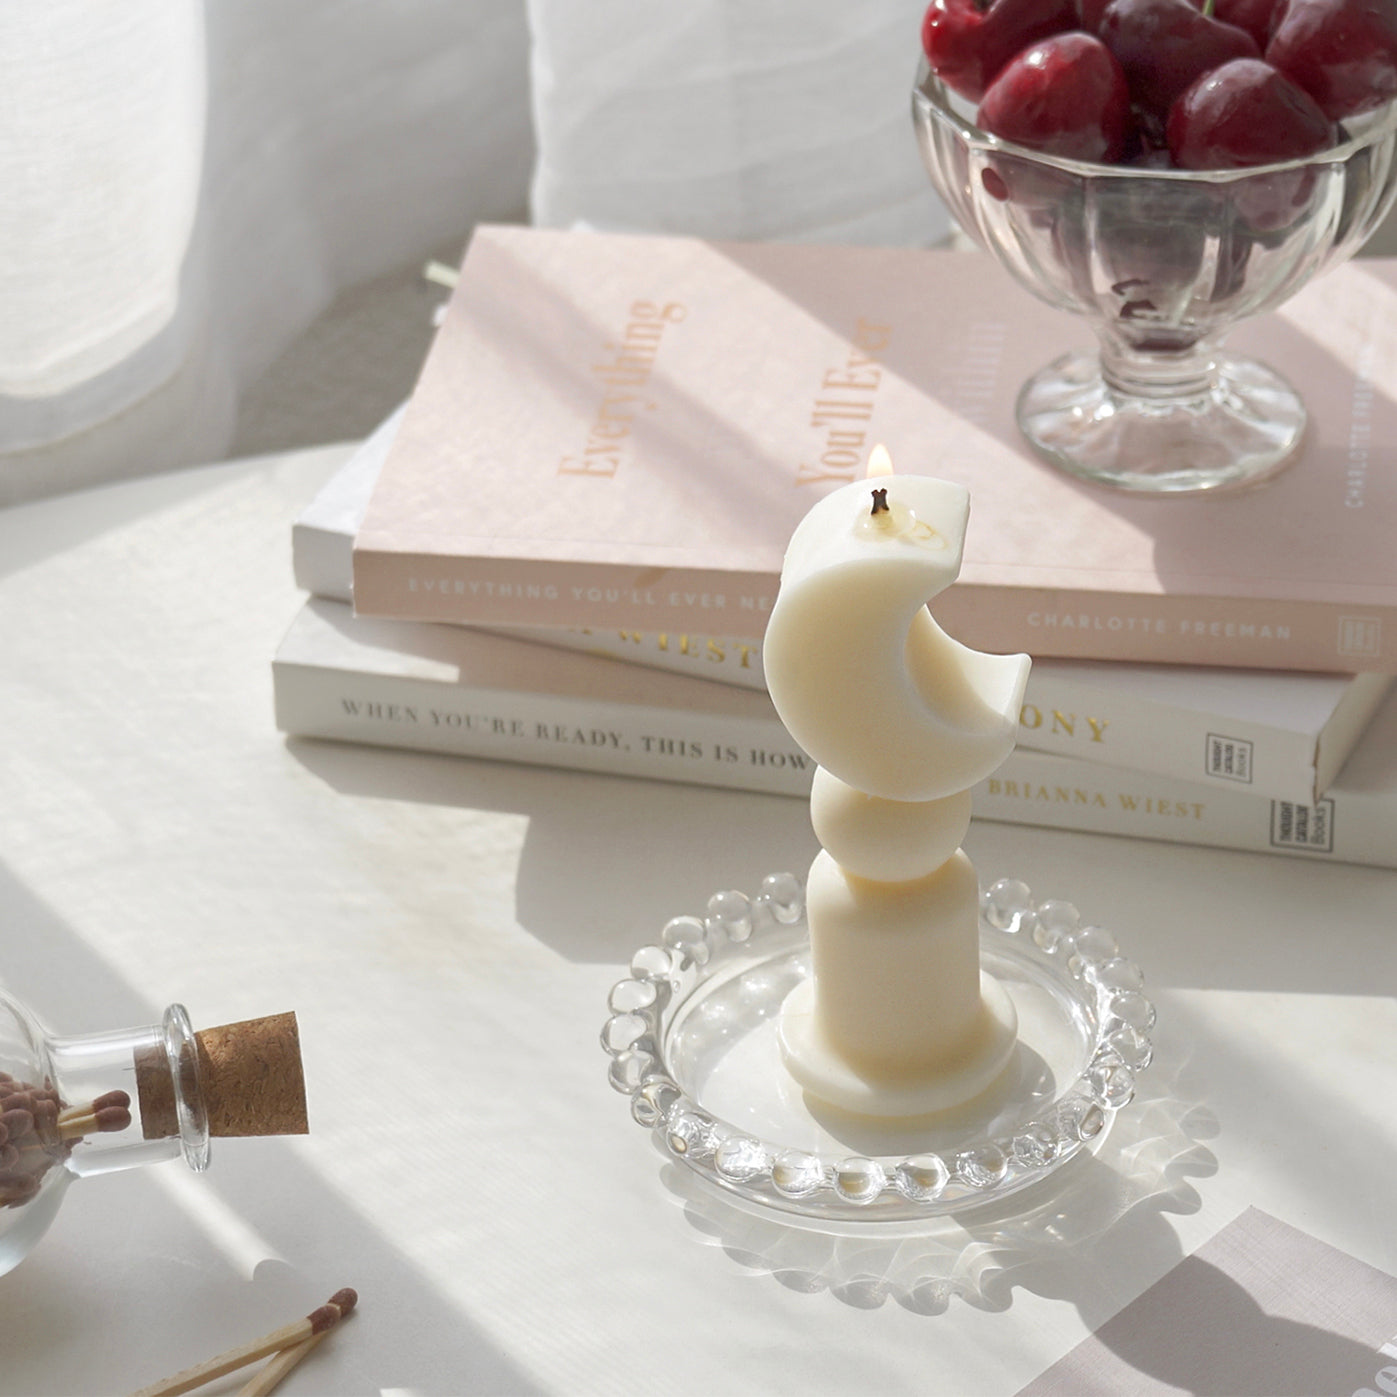 a lit crescent moon shape candles and cherries in a clear ice cream bowl on stacked books are placed on white table. The arrangement exudes minimal aesthetic dreamy vibes.